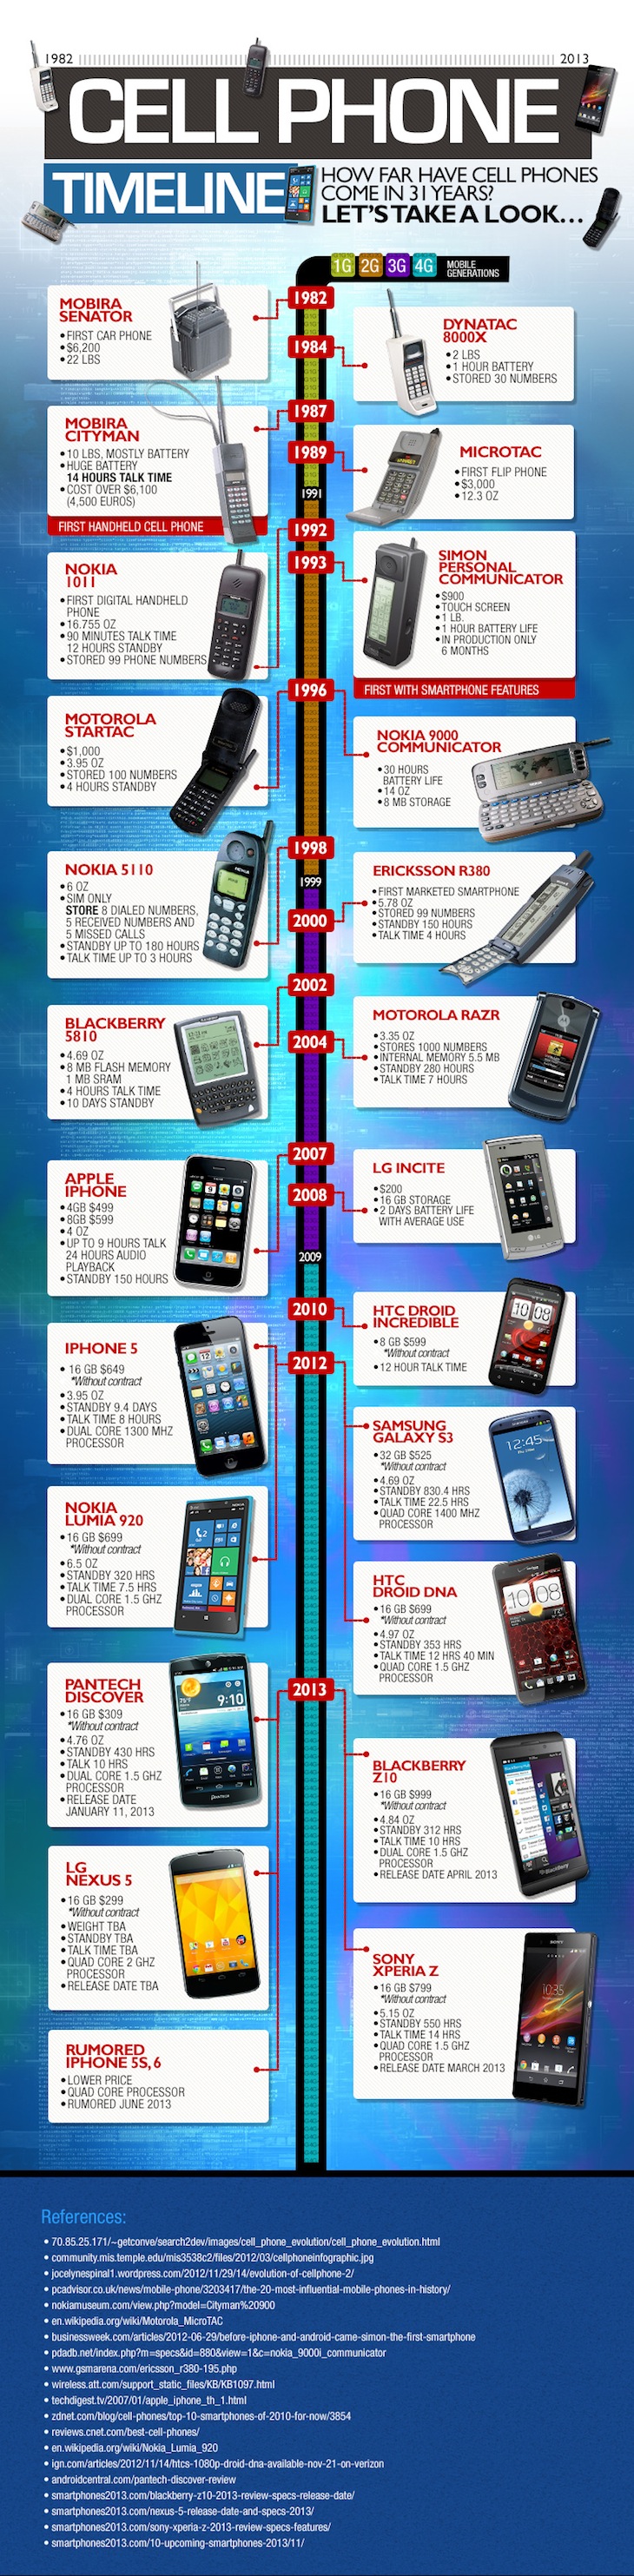 How Far Have Cell Phones Come In 31 Years? Let's Take A Look (Infographic)